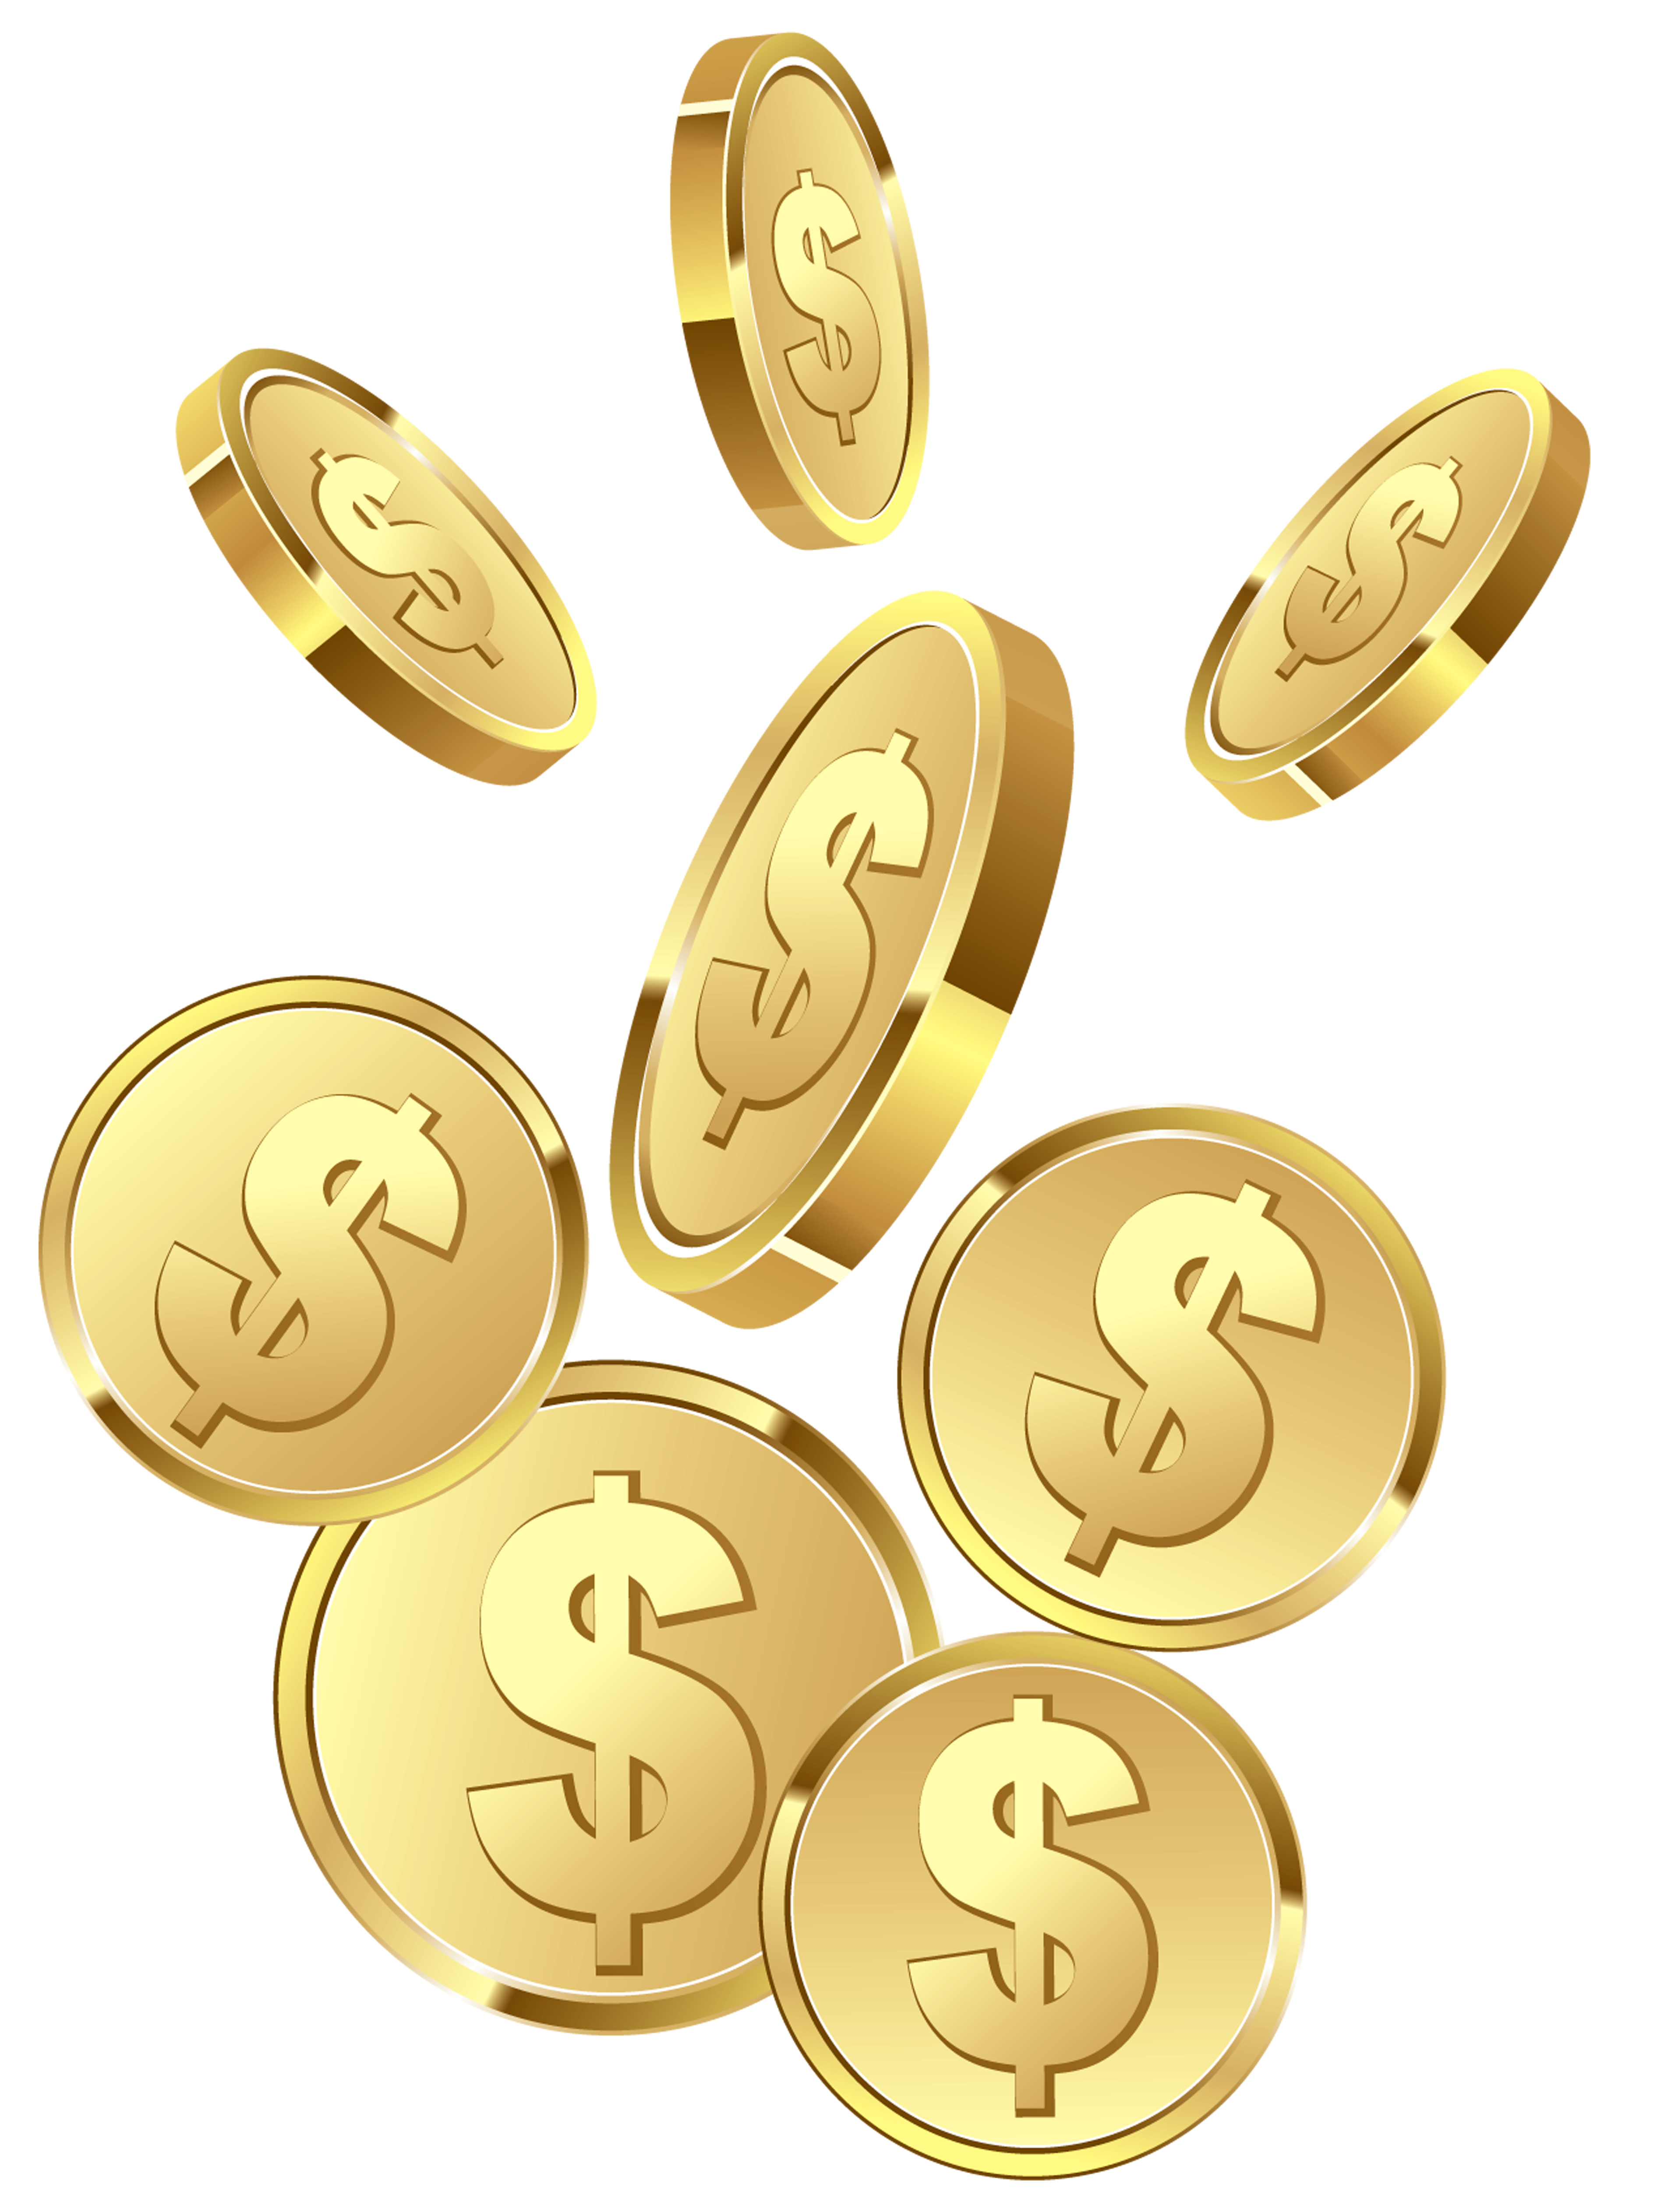 Gold Coins PNG Image.